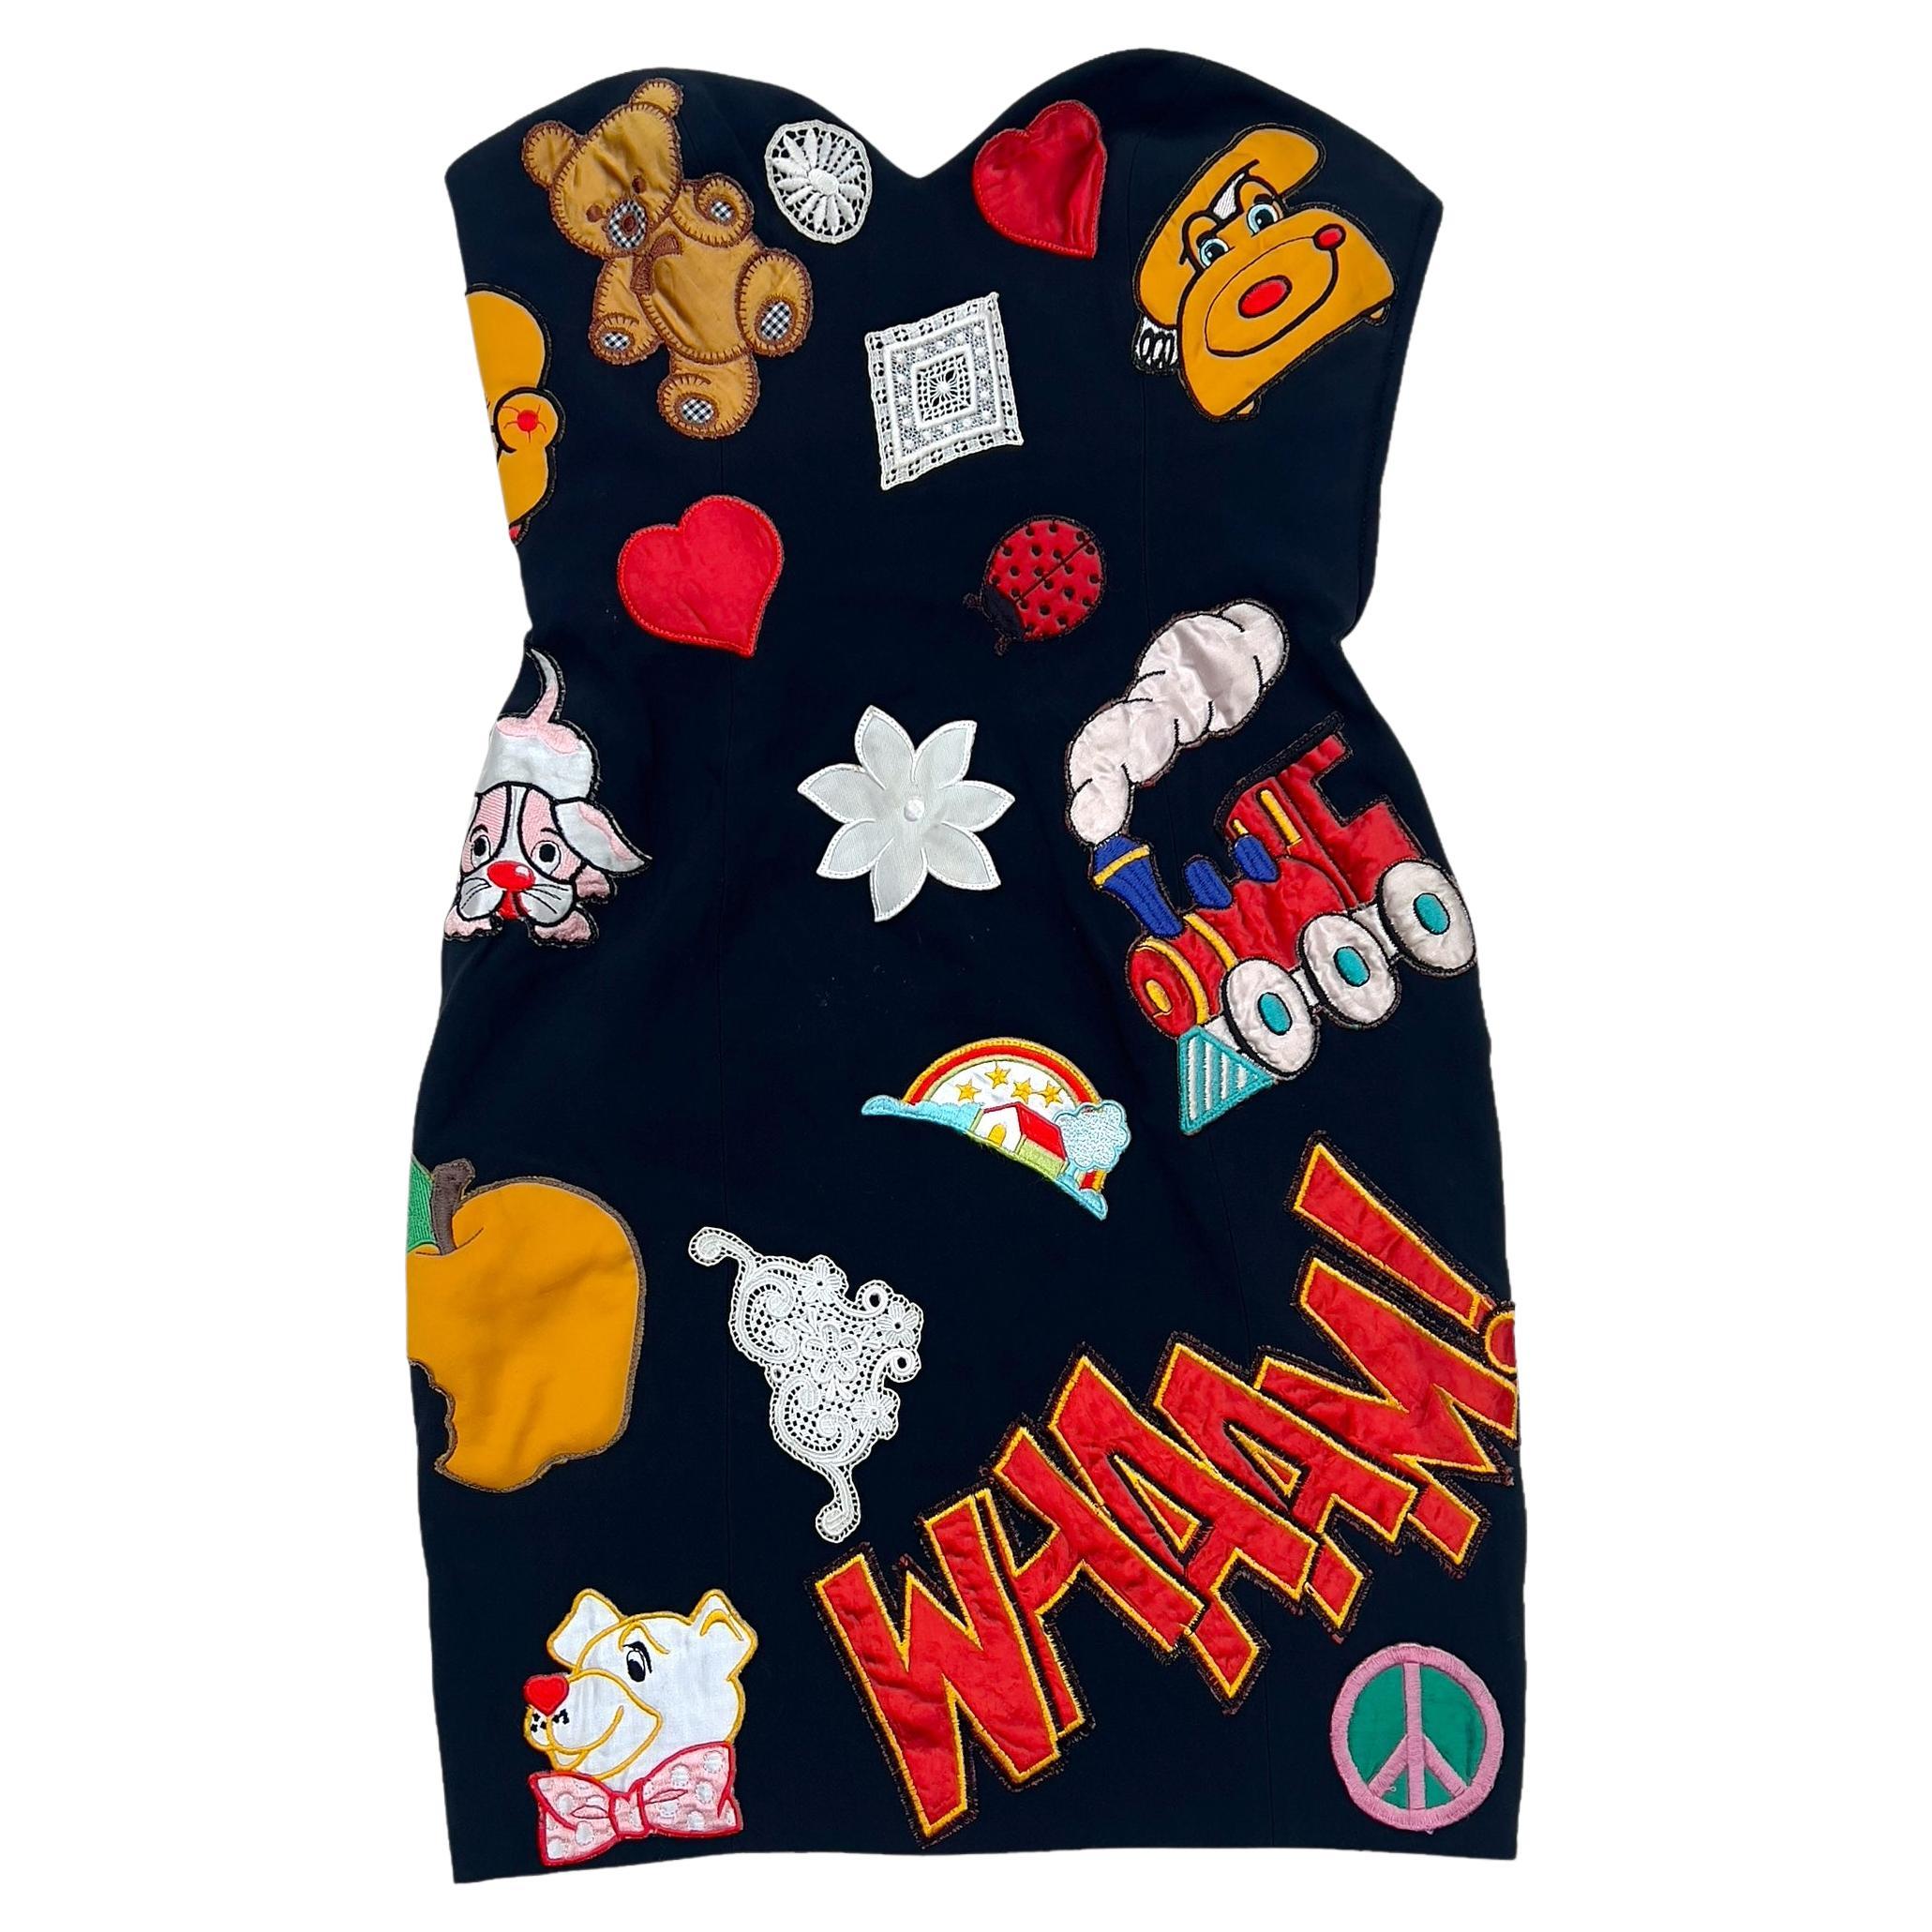 1993 Moschino runway kiss my patch dress For Sale